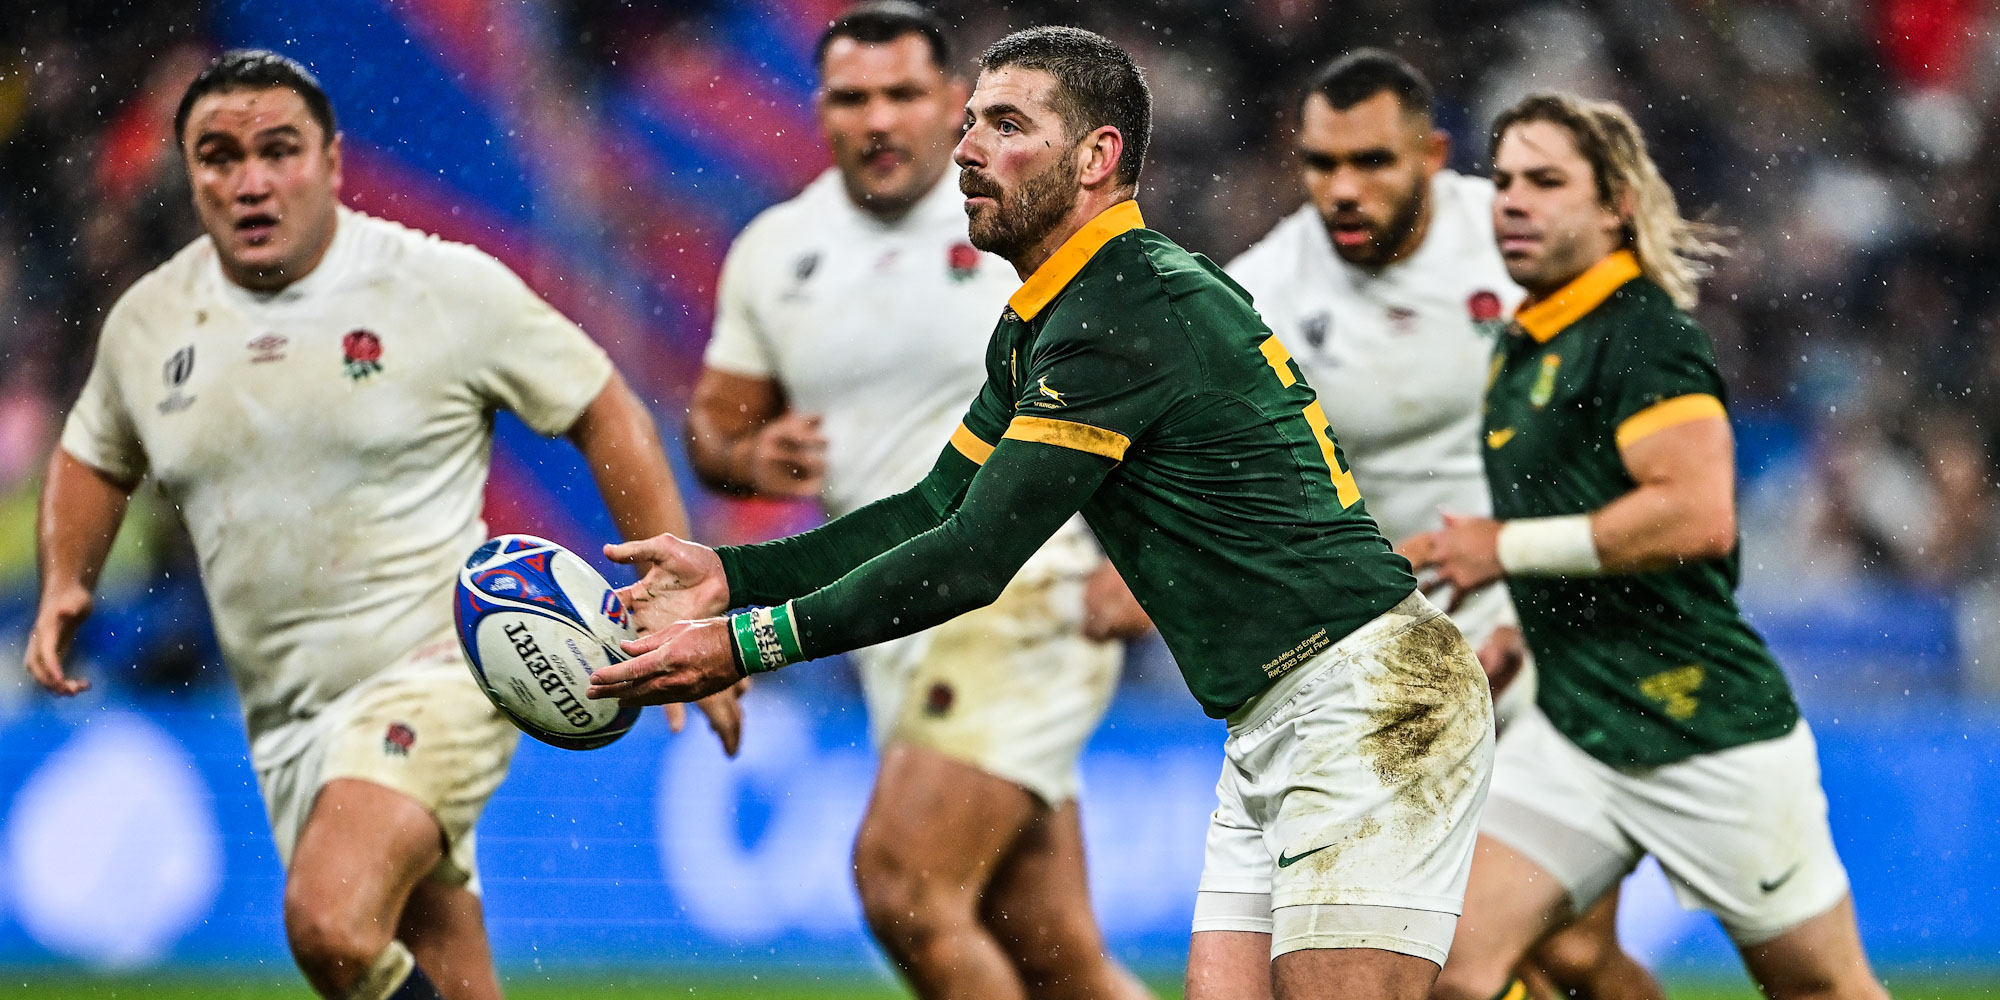 Willie le Roux in action against England in the RWC semi-final last weekend.